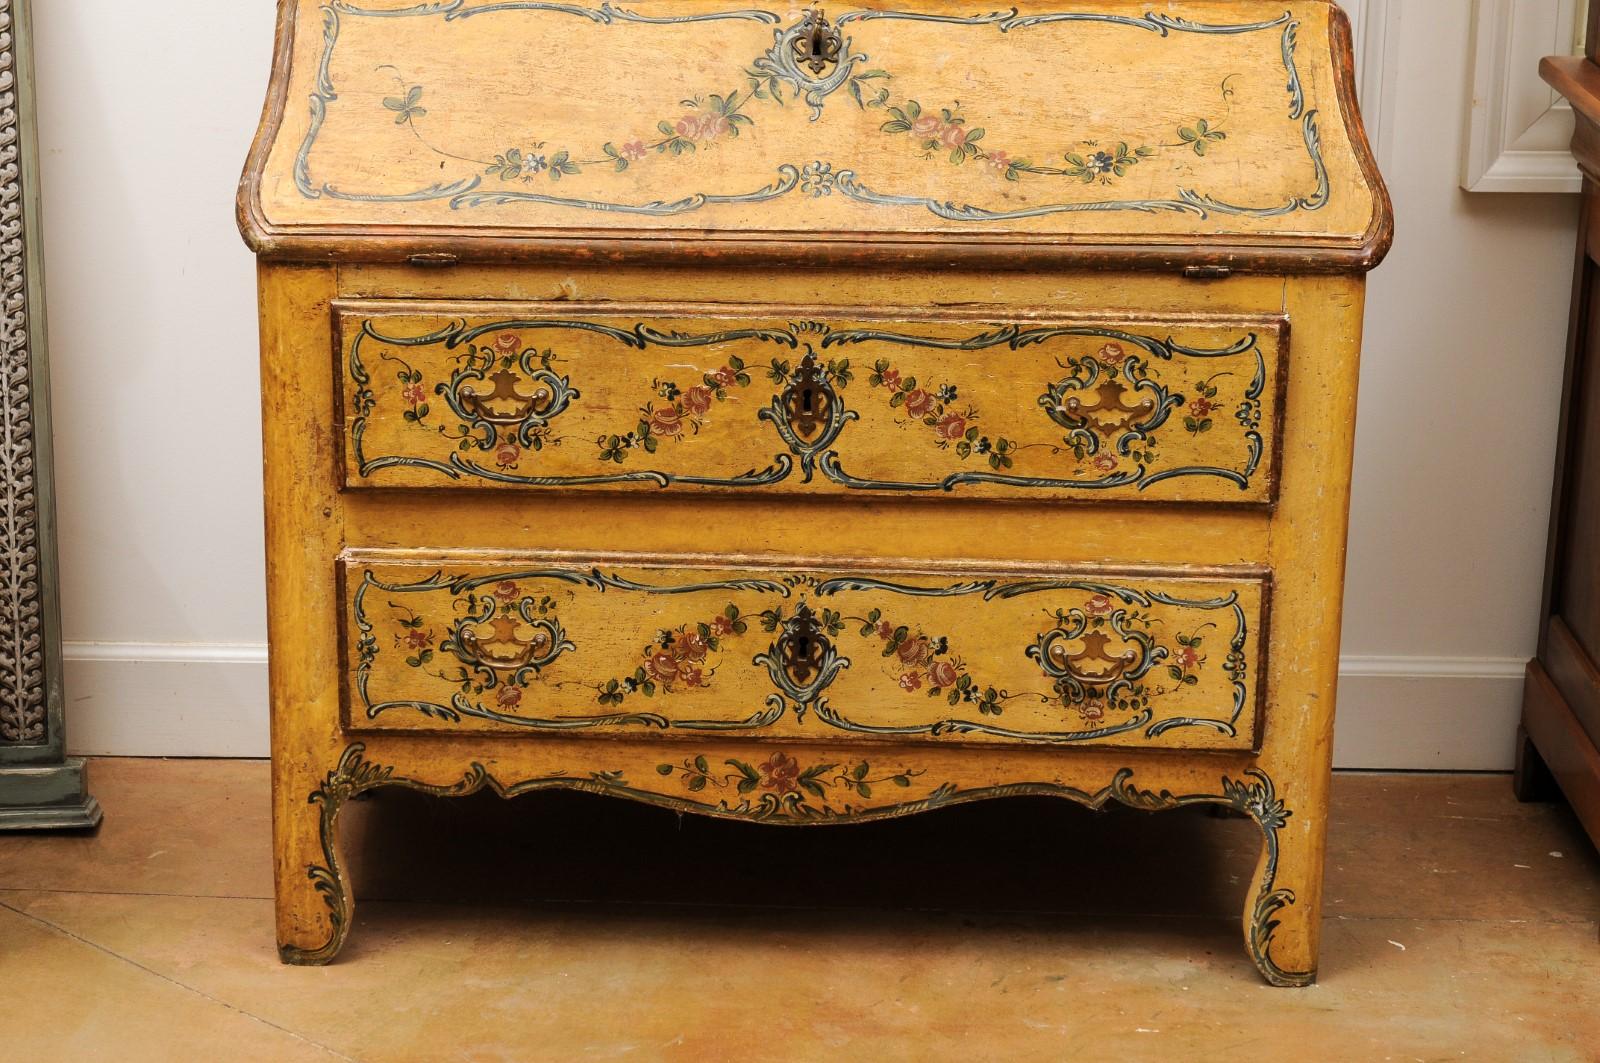 An Italian Rococo period mid-18th century secrétaire from Genoa with hand painted décor and slant-front desk. Created in Northwestern Italy during the third quarter of the 18th century, this tall secrétaire features an arching and molded cornice